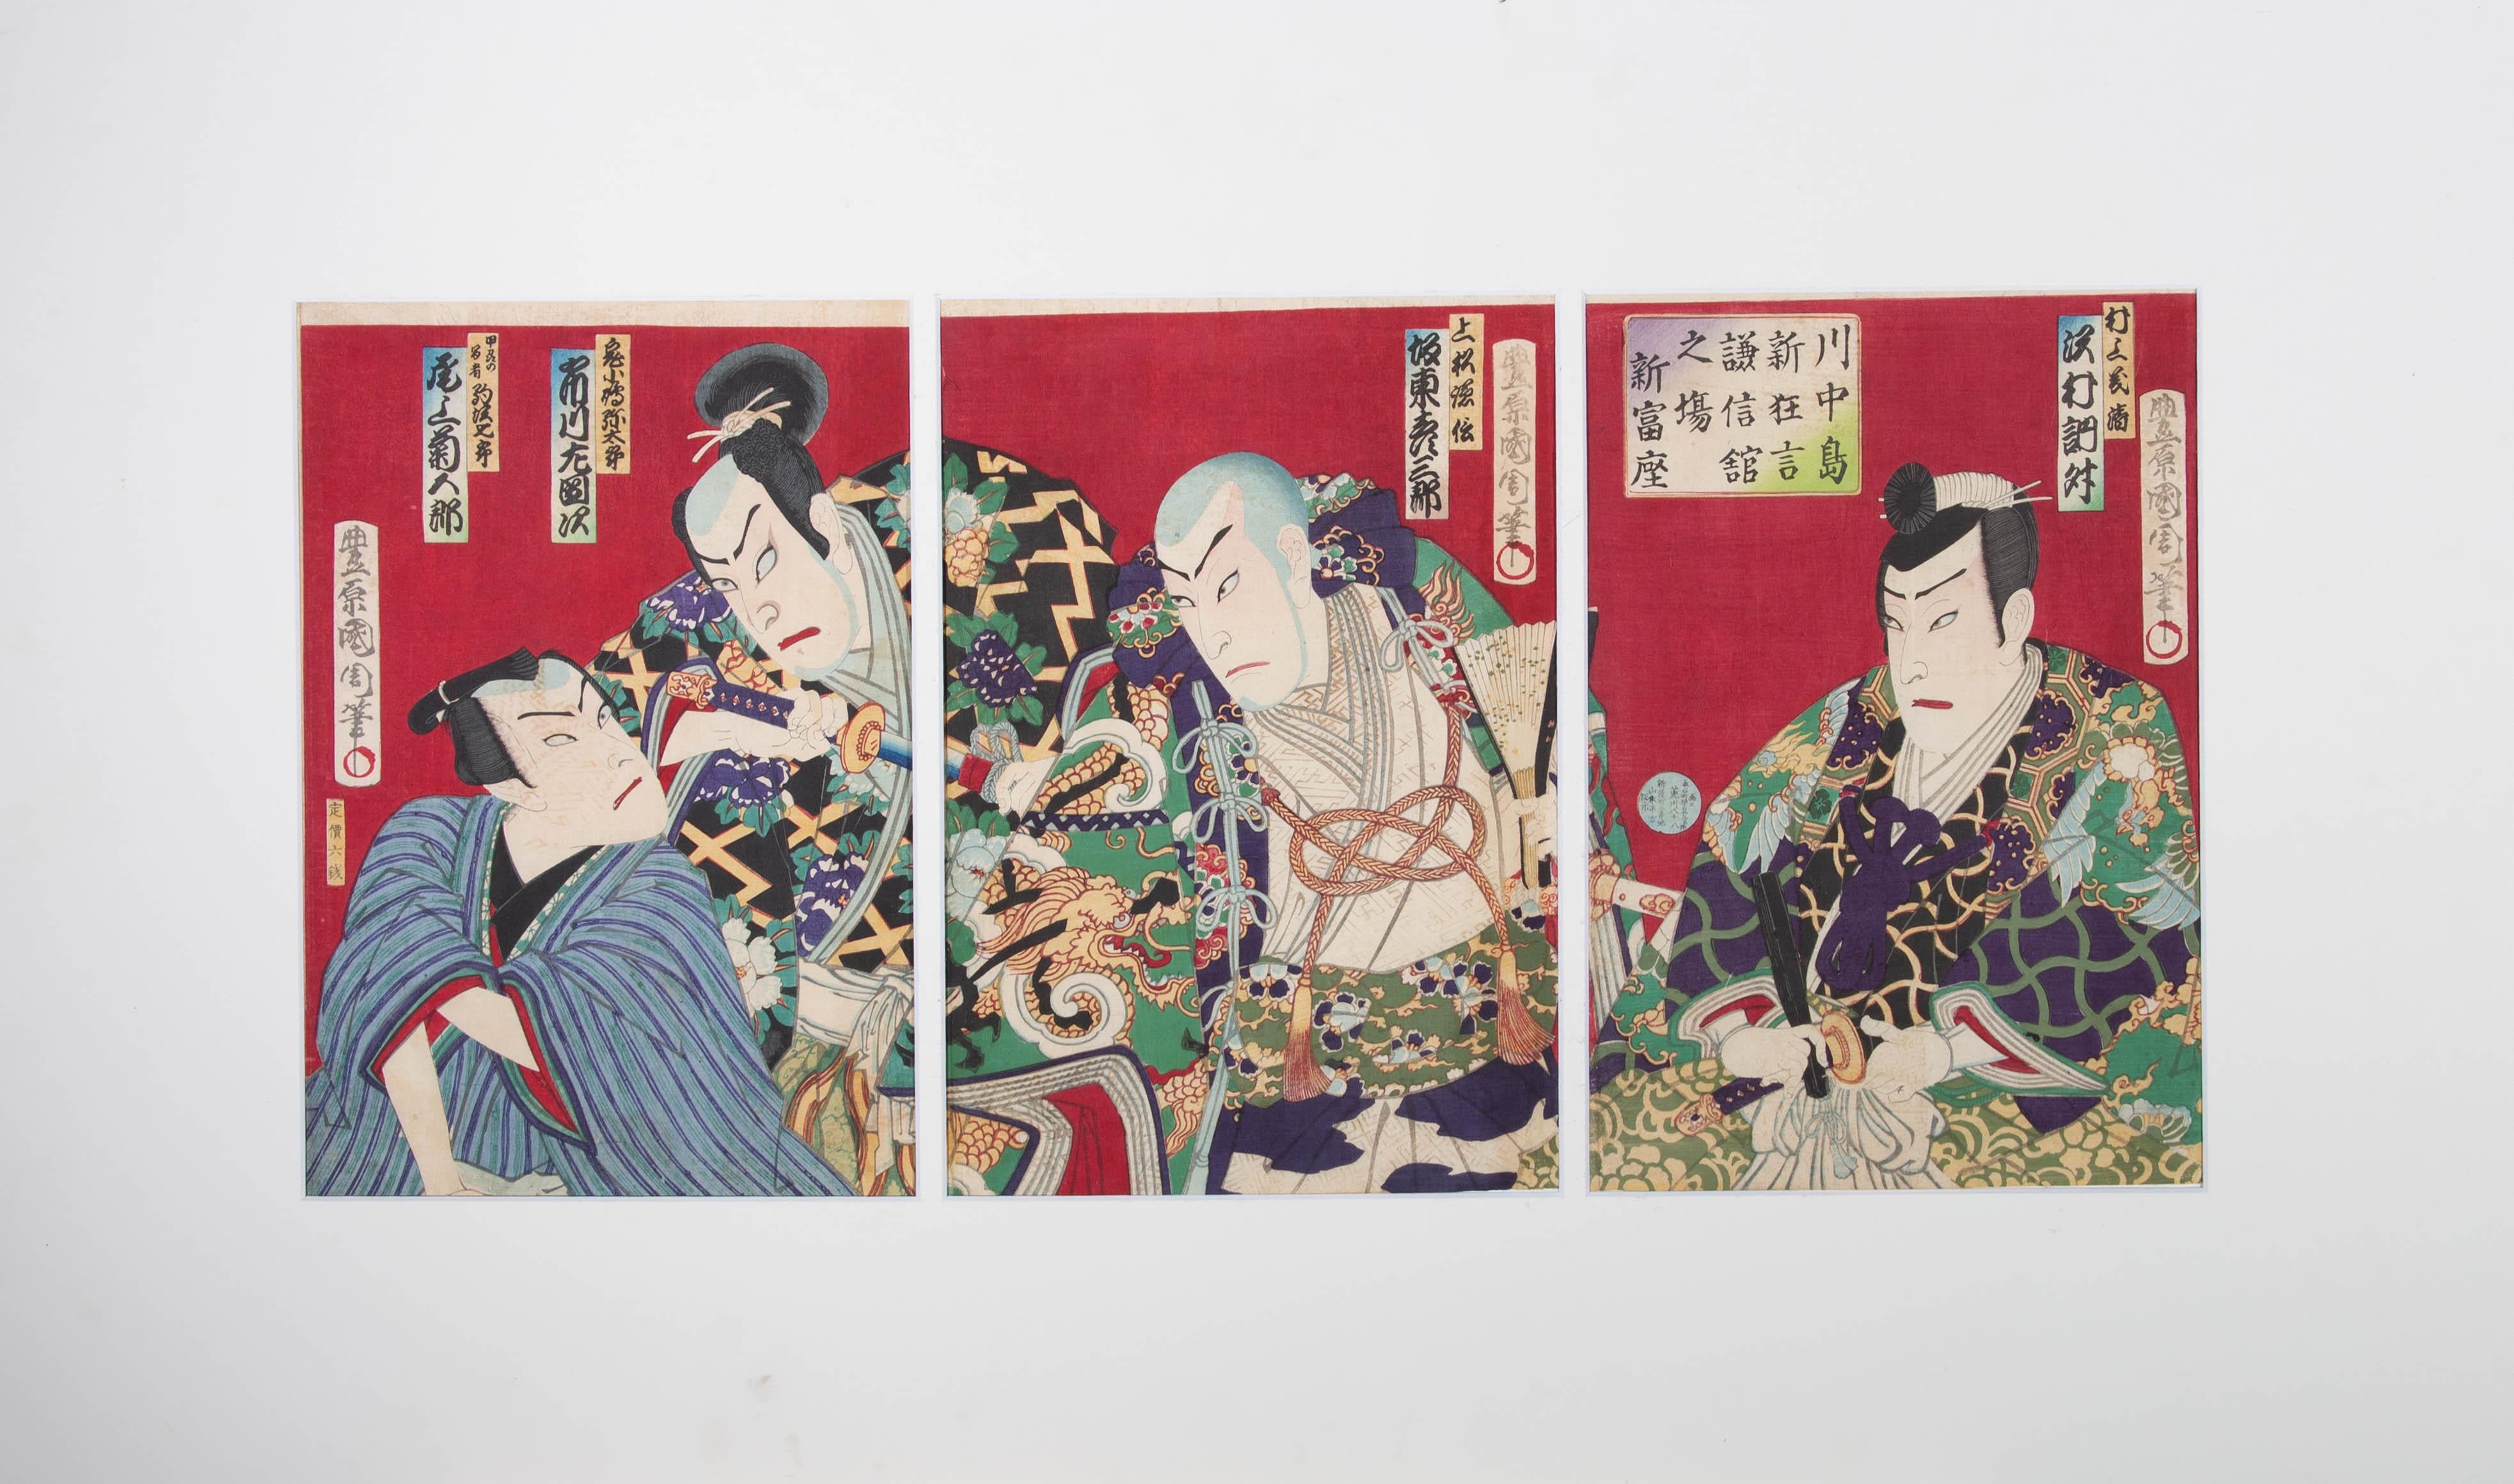 An incredibly vibrant and dynamic traditional Japanese ukiyo-e woodblock triptych by Toyohara Kunichika. Toyohara was best known for his kabuki theater scenes and this is a fine example of one of these. This particular scene shows kabuki actors are